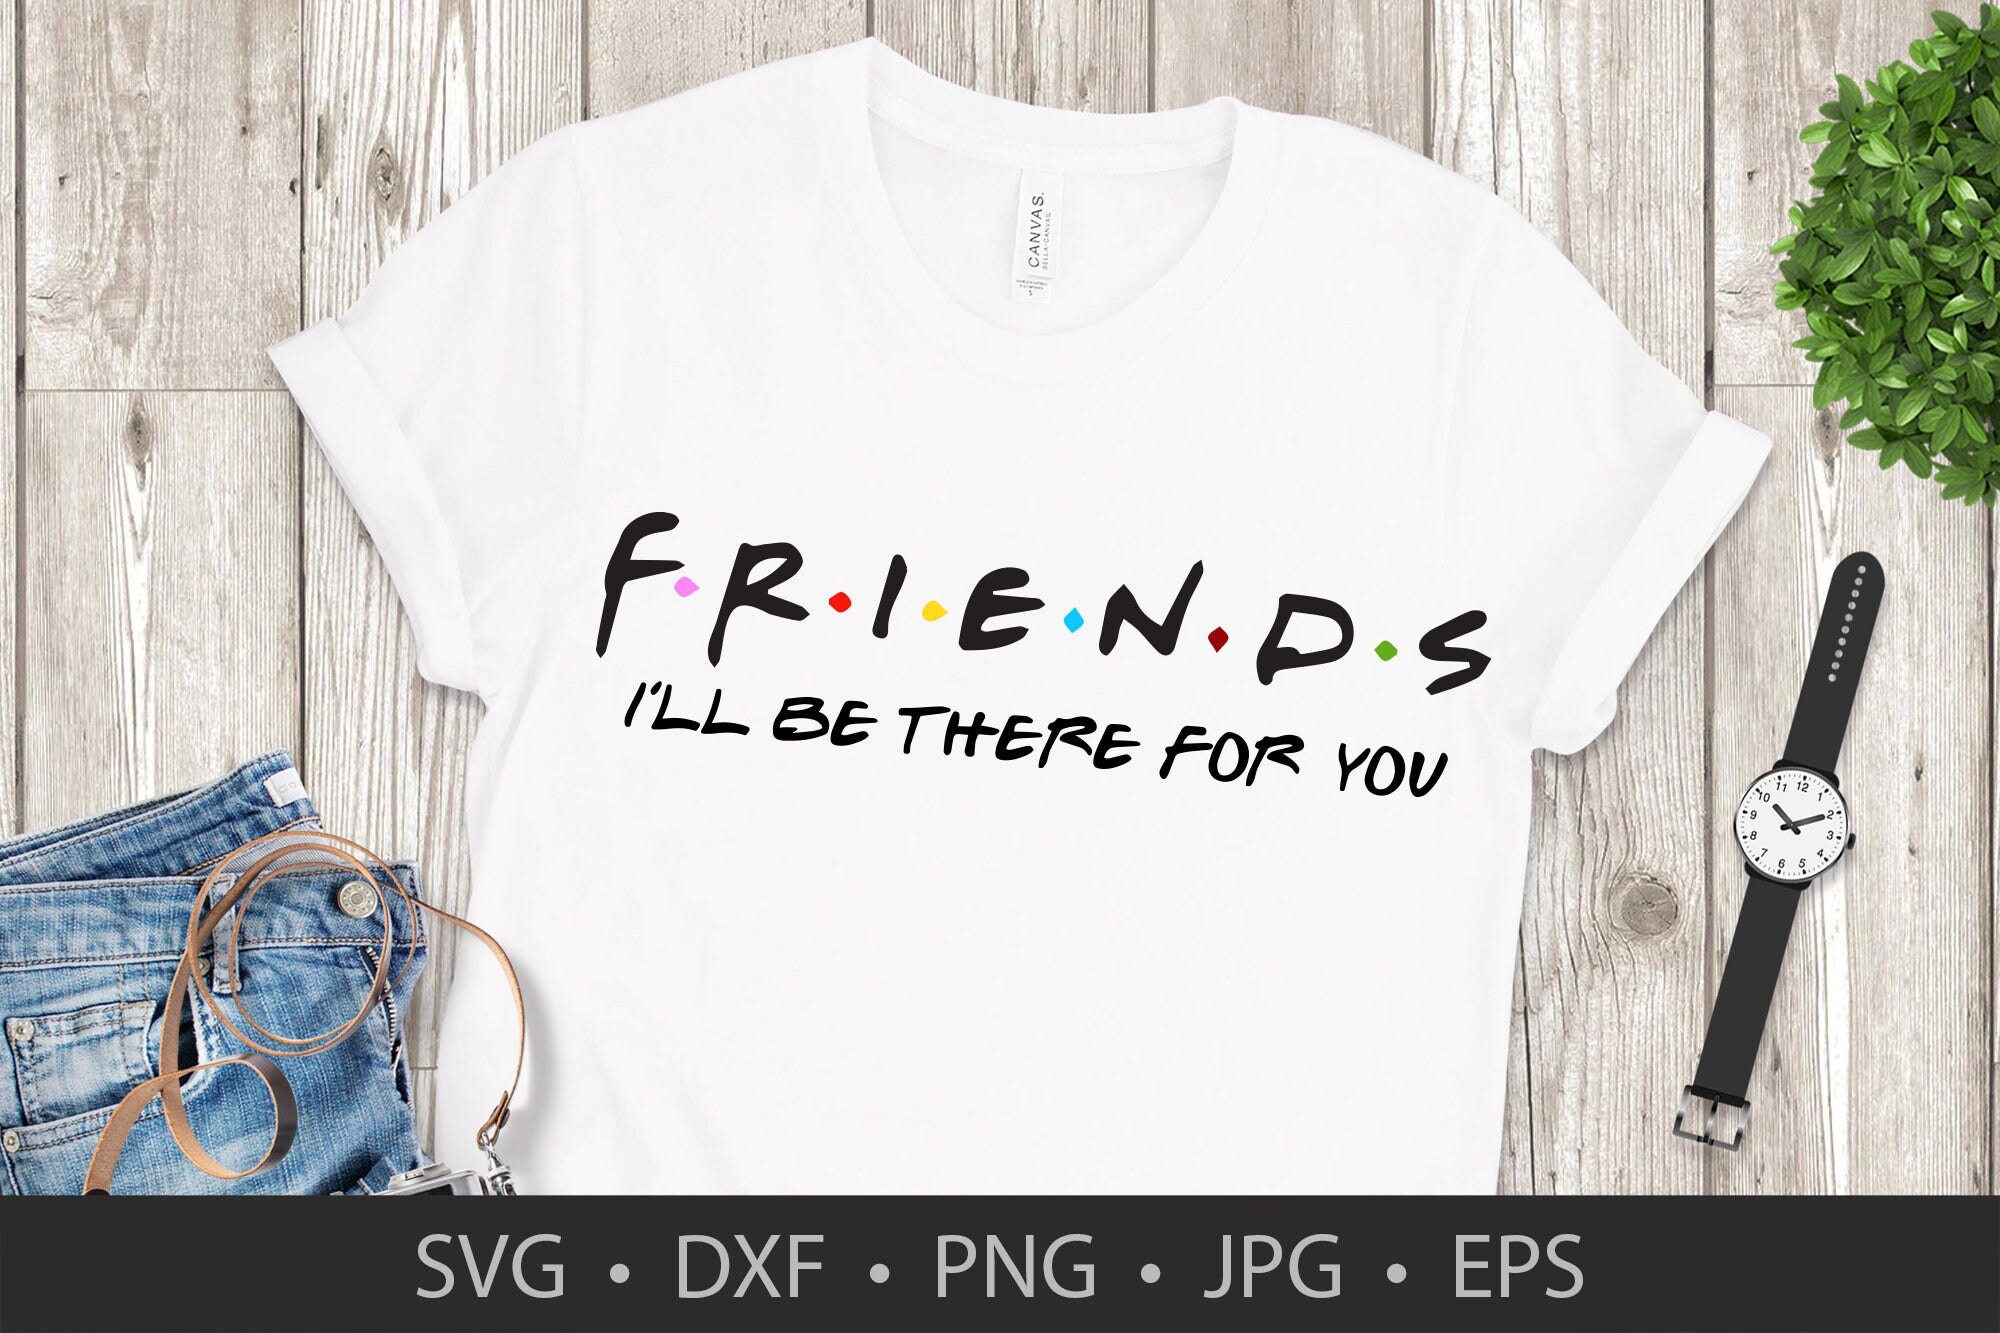 FRIENDS Ill Be There For You CUSTOM T Shirt Digital Dl Cricut Cameo Silhouette Studio Designer Vinyl Stencil Vector svg dxf png jpg eps